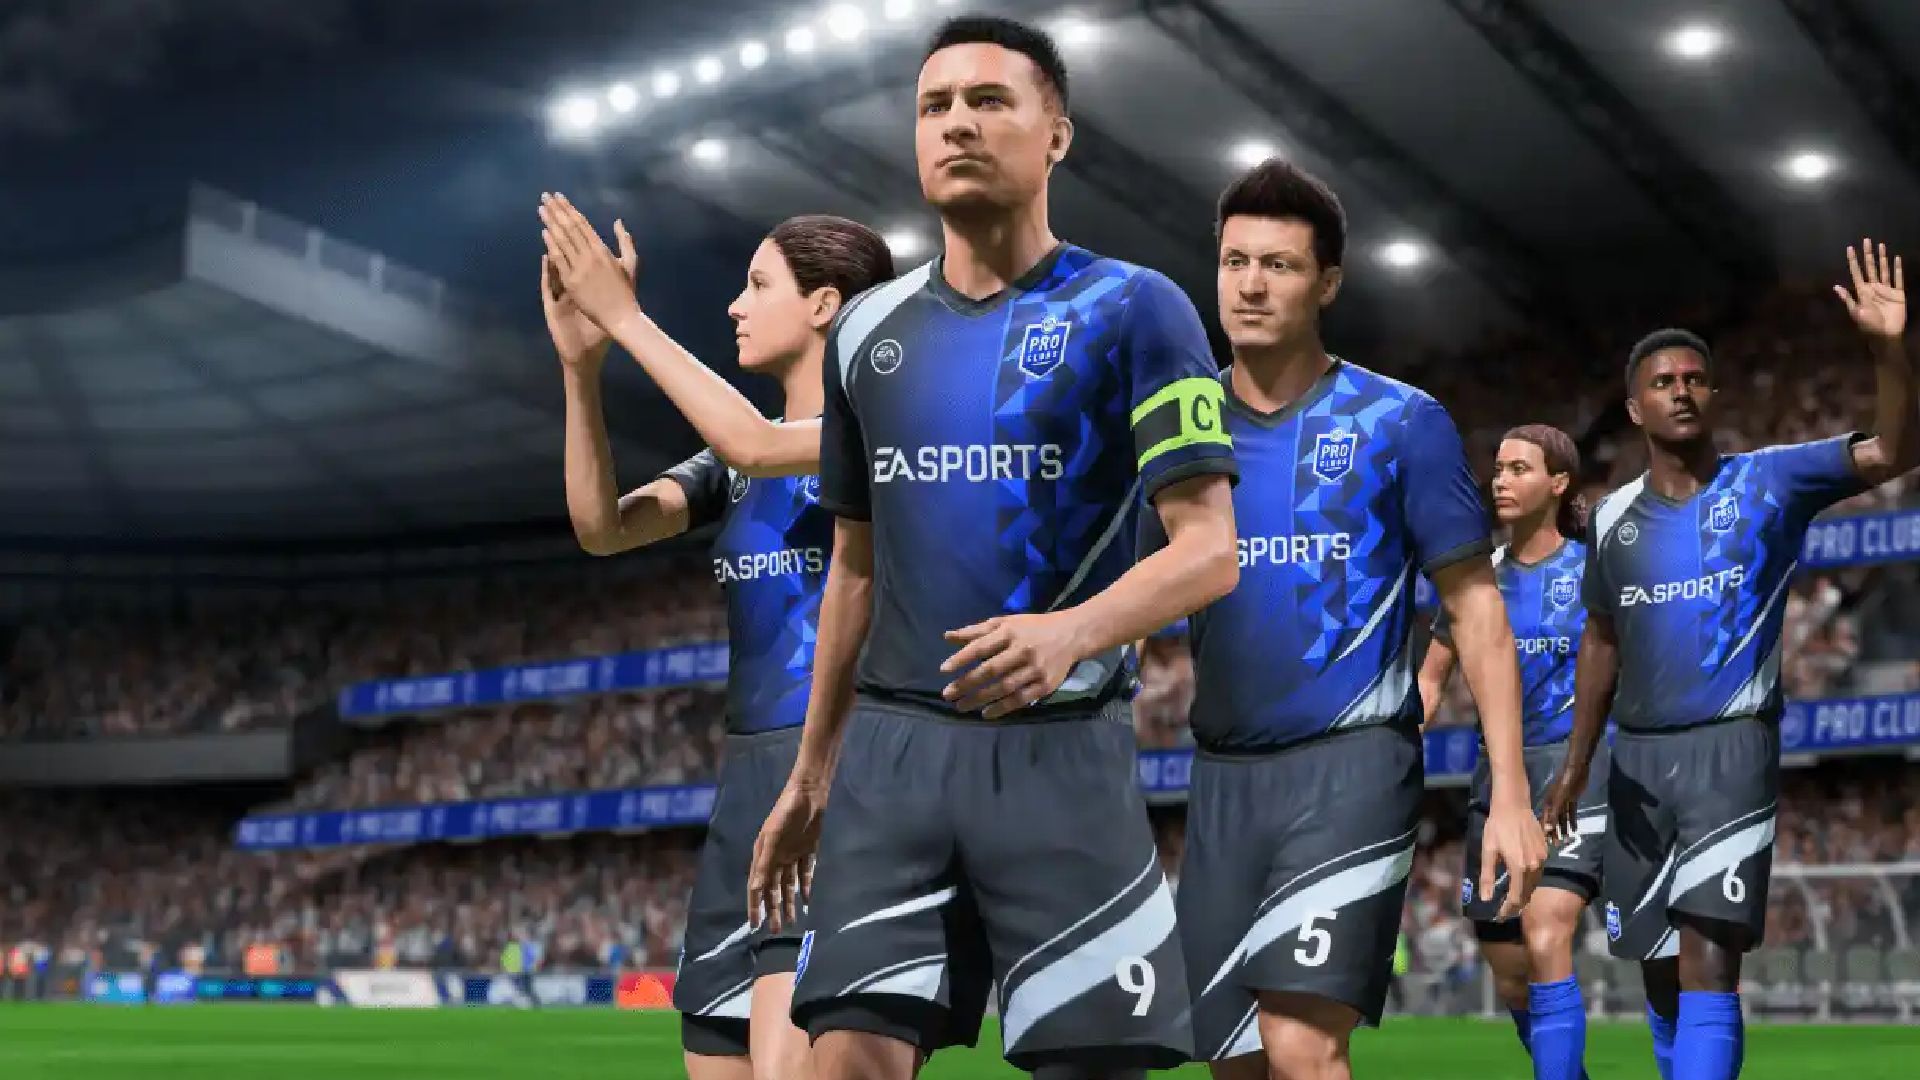 FIFA 23 Available Now in The Play List For EA Play Subscribers - Operation  Sports